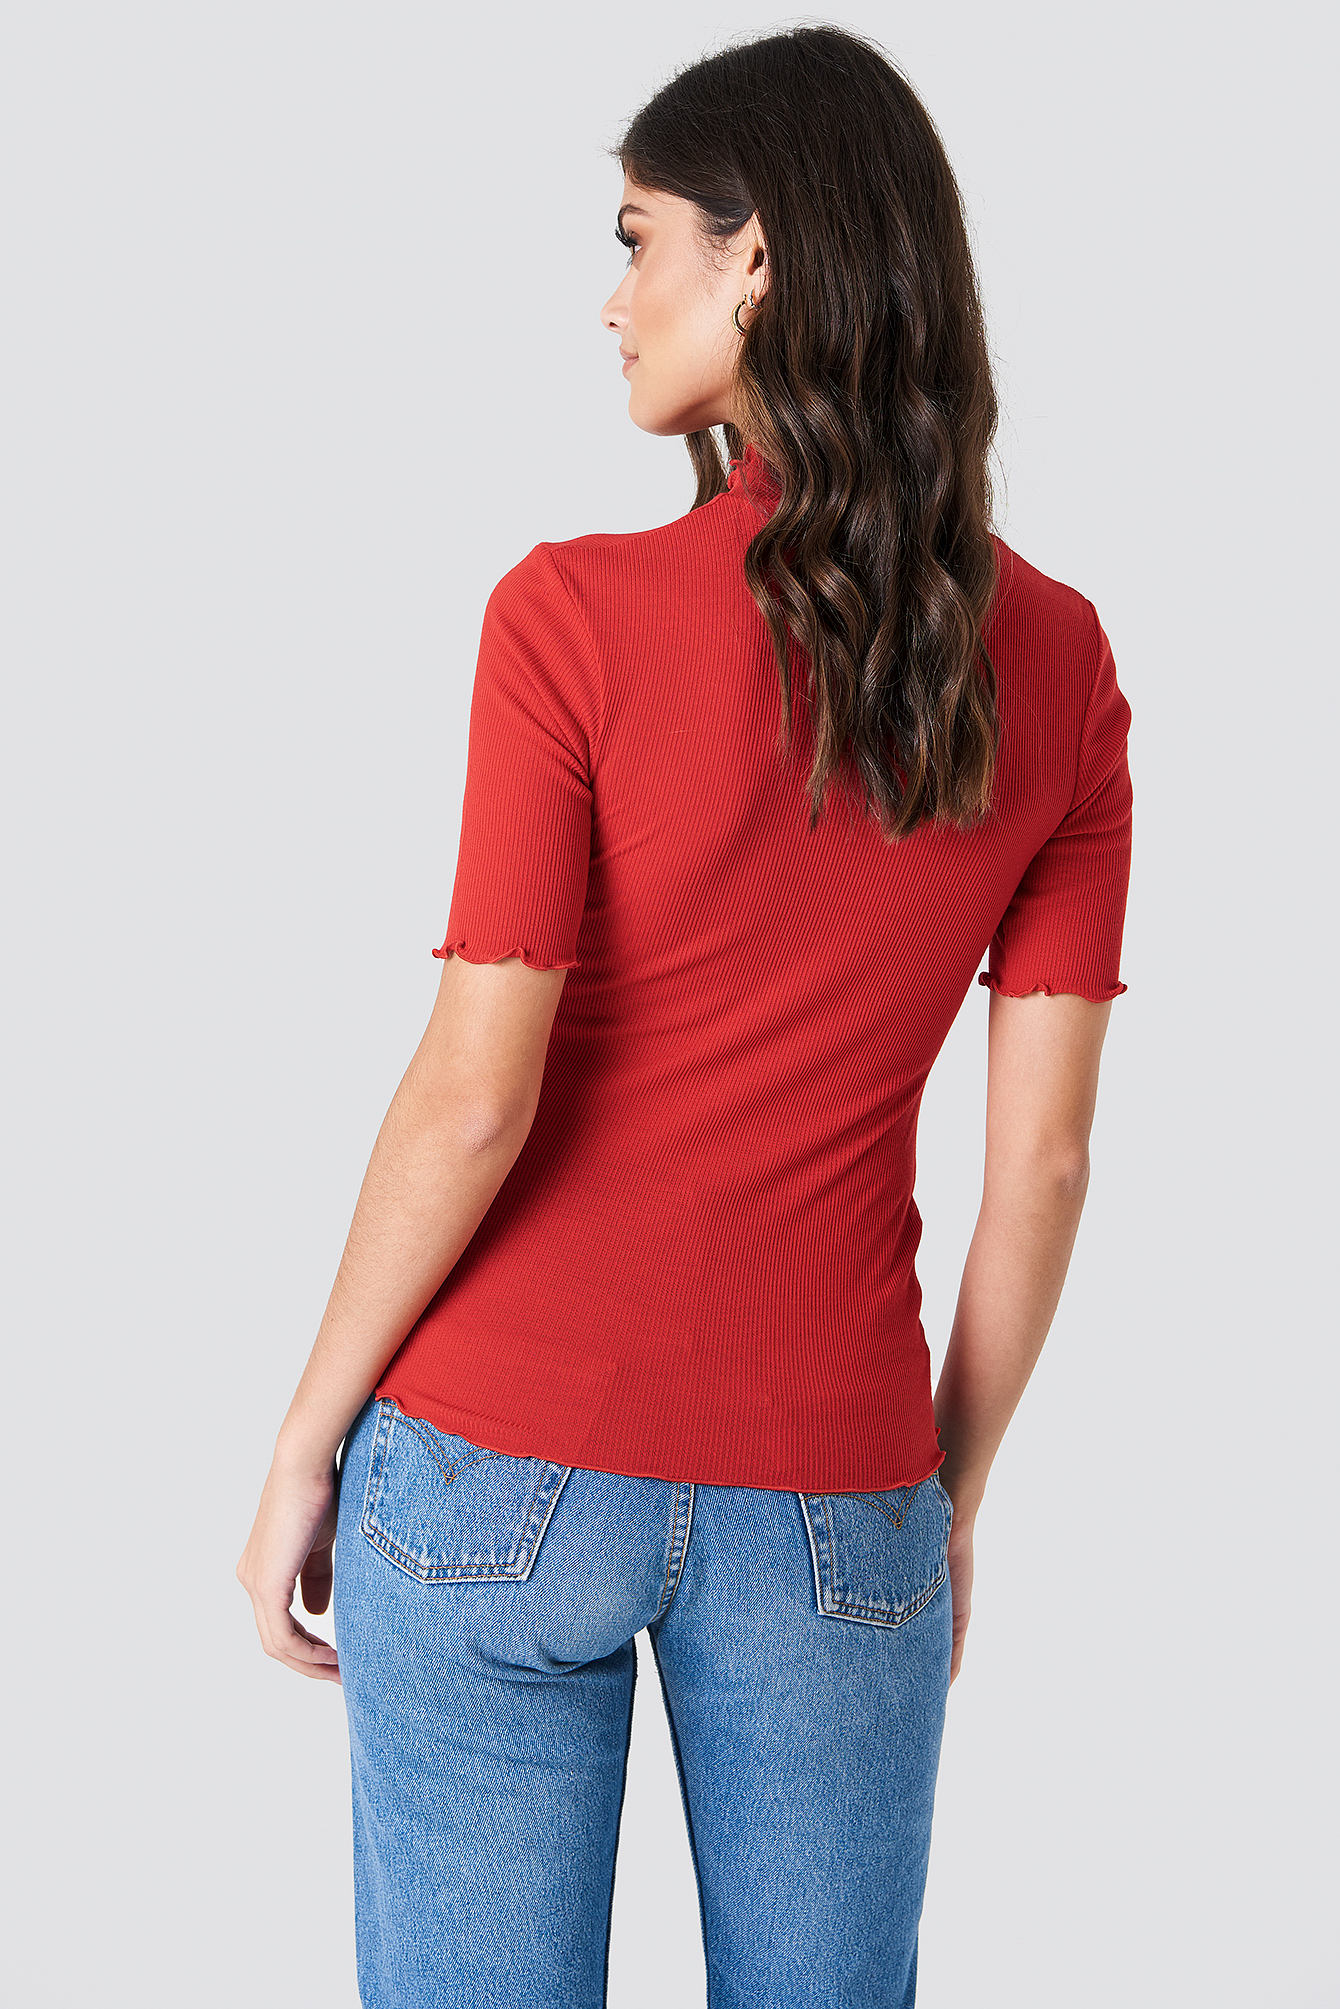 Racing Red Nelli SS Top